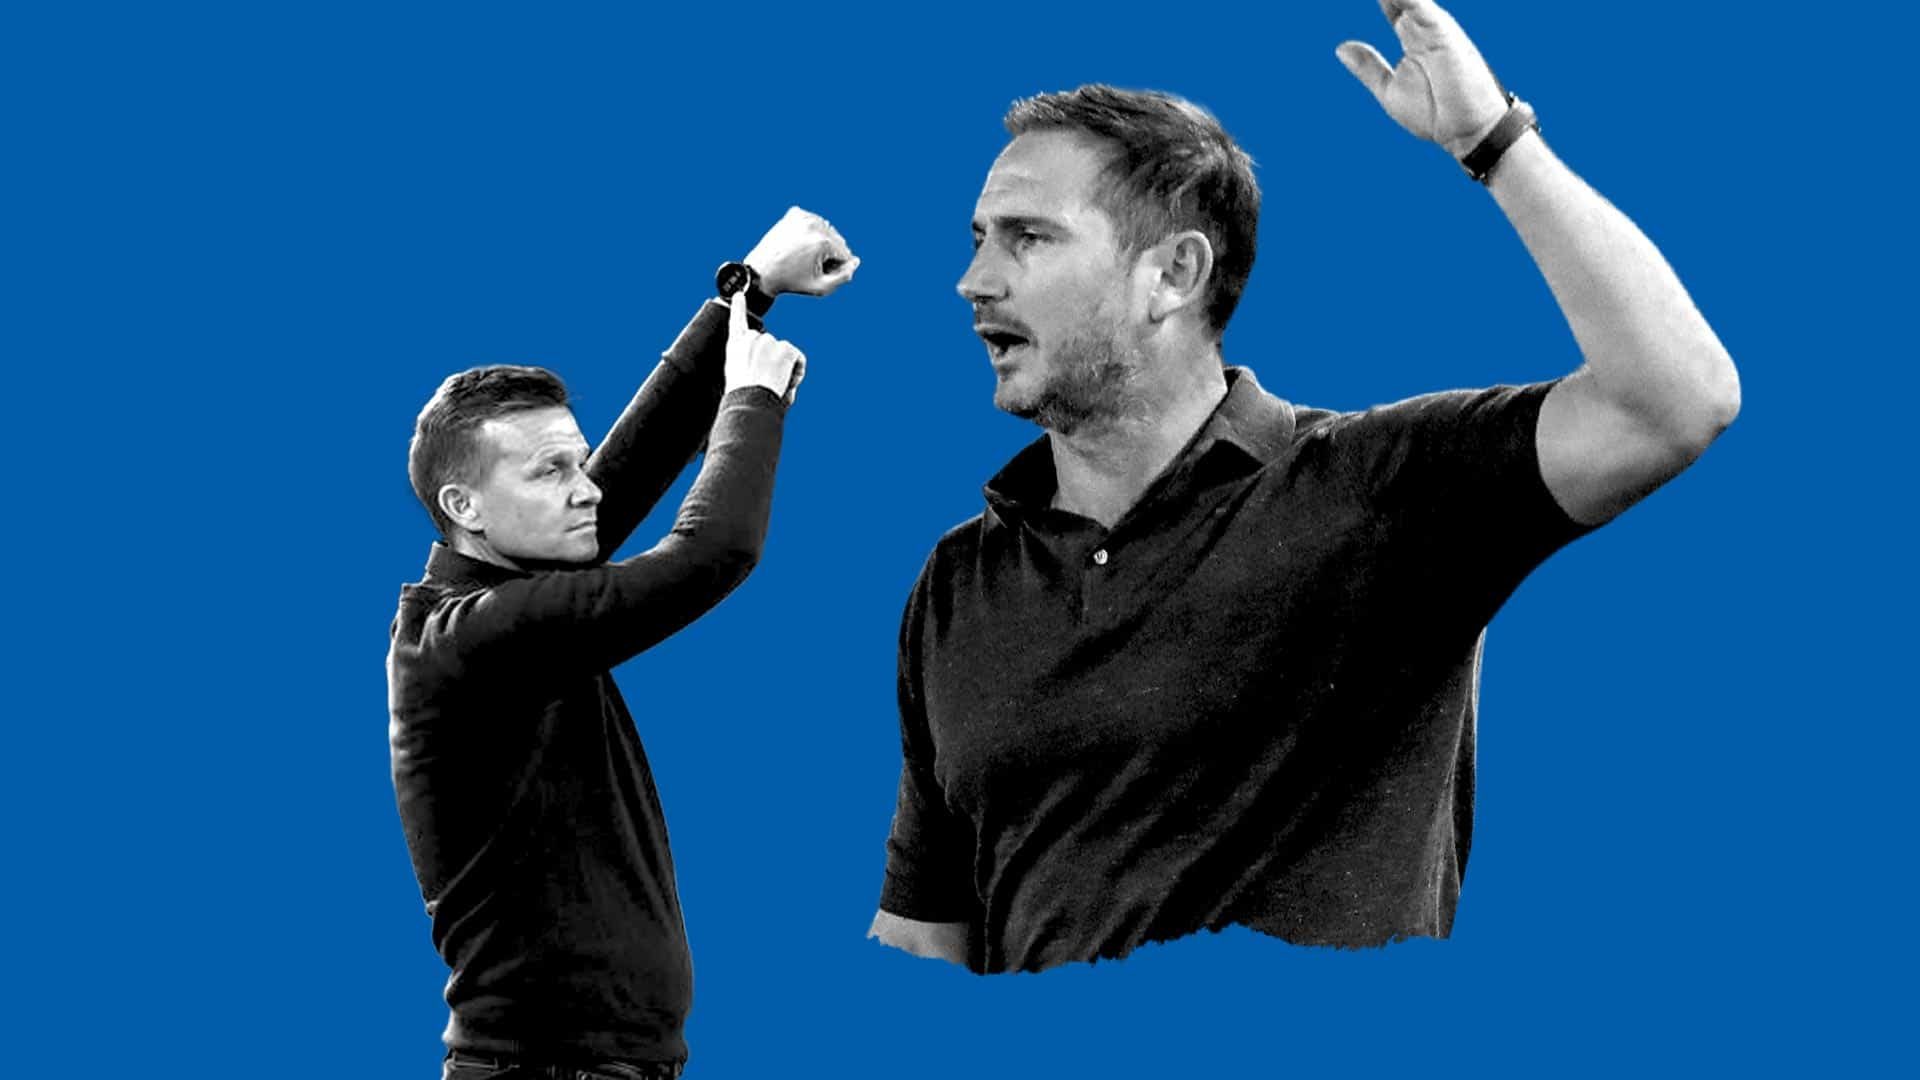 Jesse Marsch pointing to his watch and Frank Lampard holding his hand in the air in what should be an apology, but is probably preparation to pat himself on the back